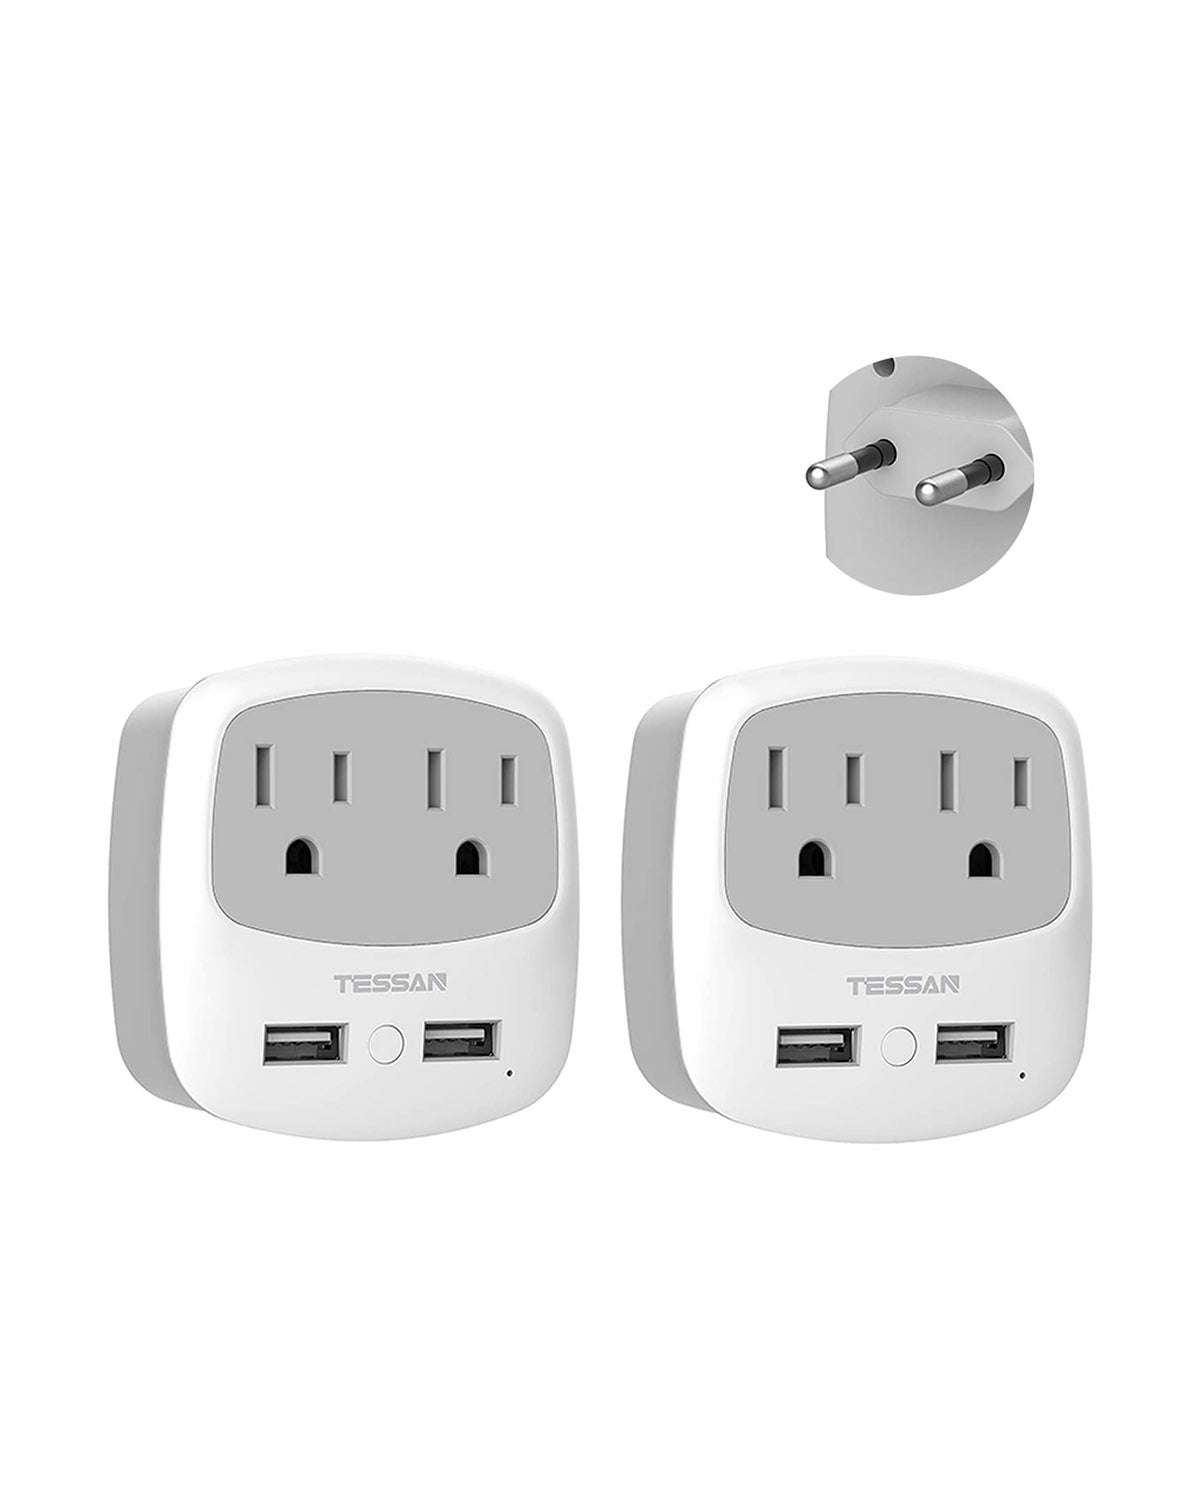 TESSAN US to Europe Power Adaptor with 2 USB 2 AC Outlets, 2 Pack